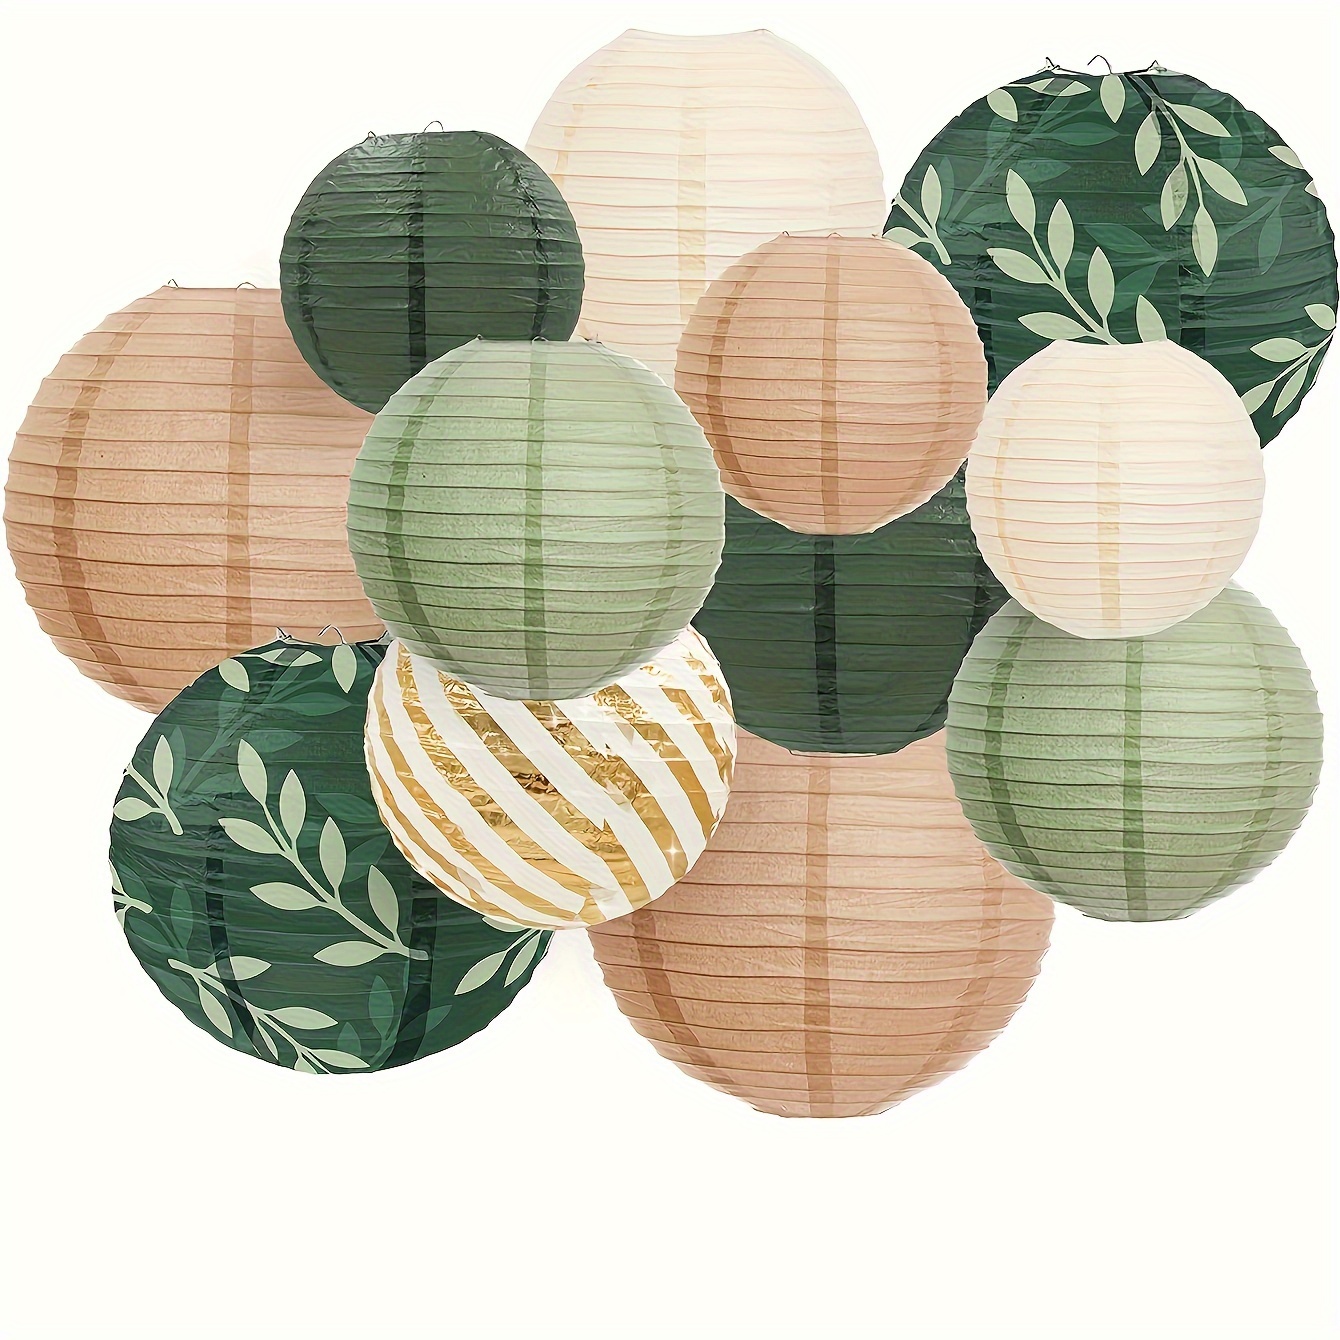 

6-pack Assorted Paper Lantern Set, Decorative Hanging Lanterns With Gold Foil, Brown & Green, Ideal For Wedding, Birthday, Bridal Shower, Rustic Country Decor - Universal Seasonal Outdoor Decoration